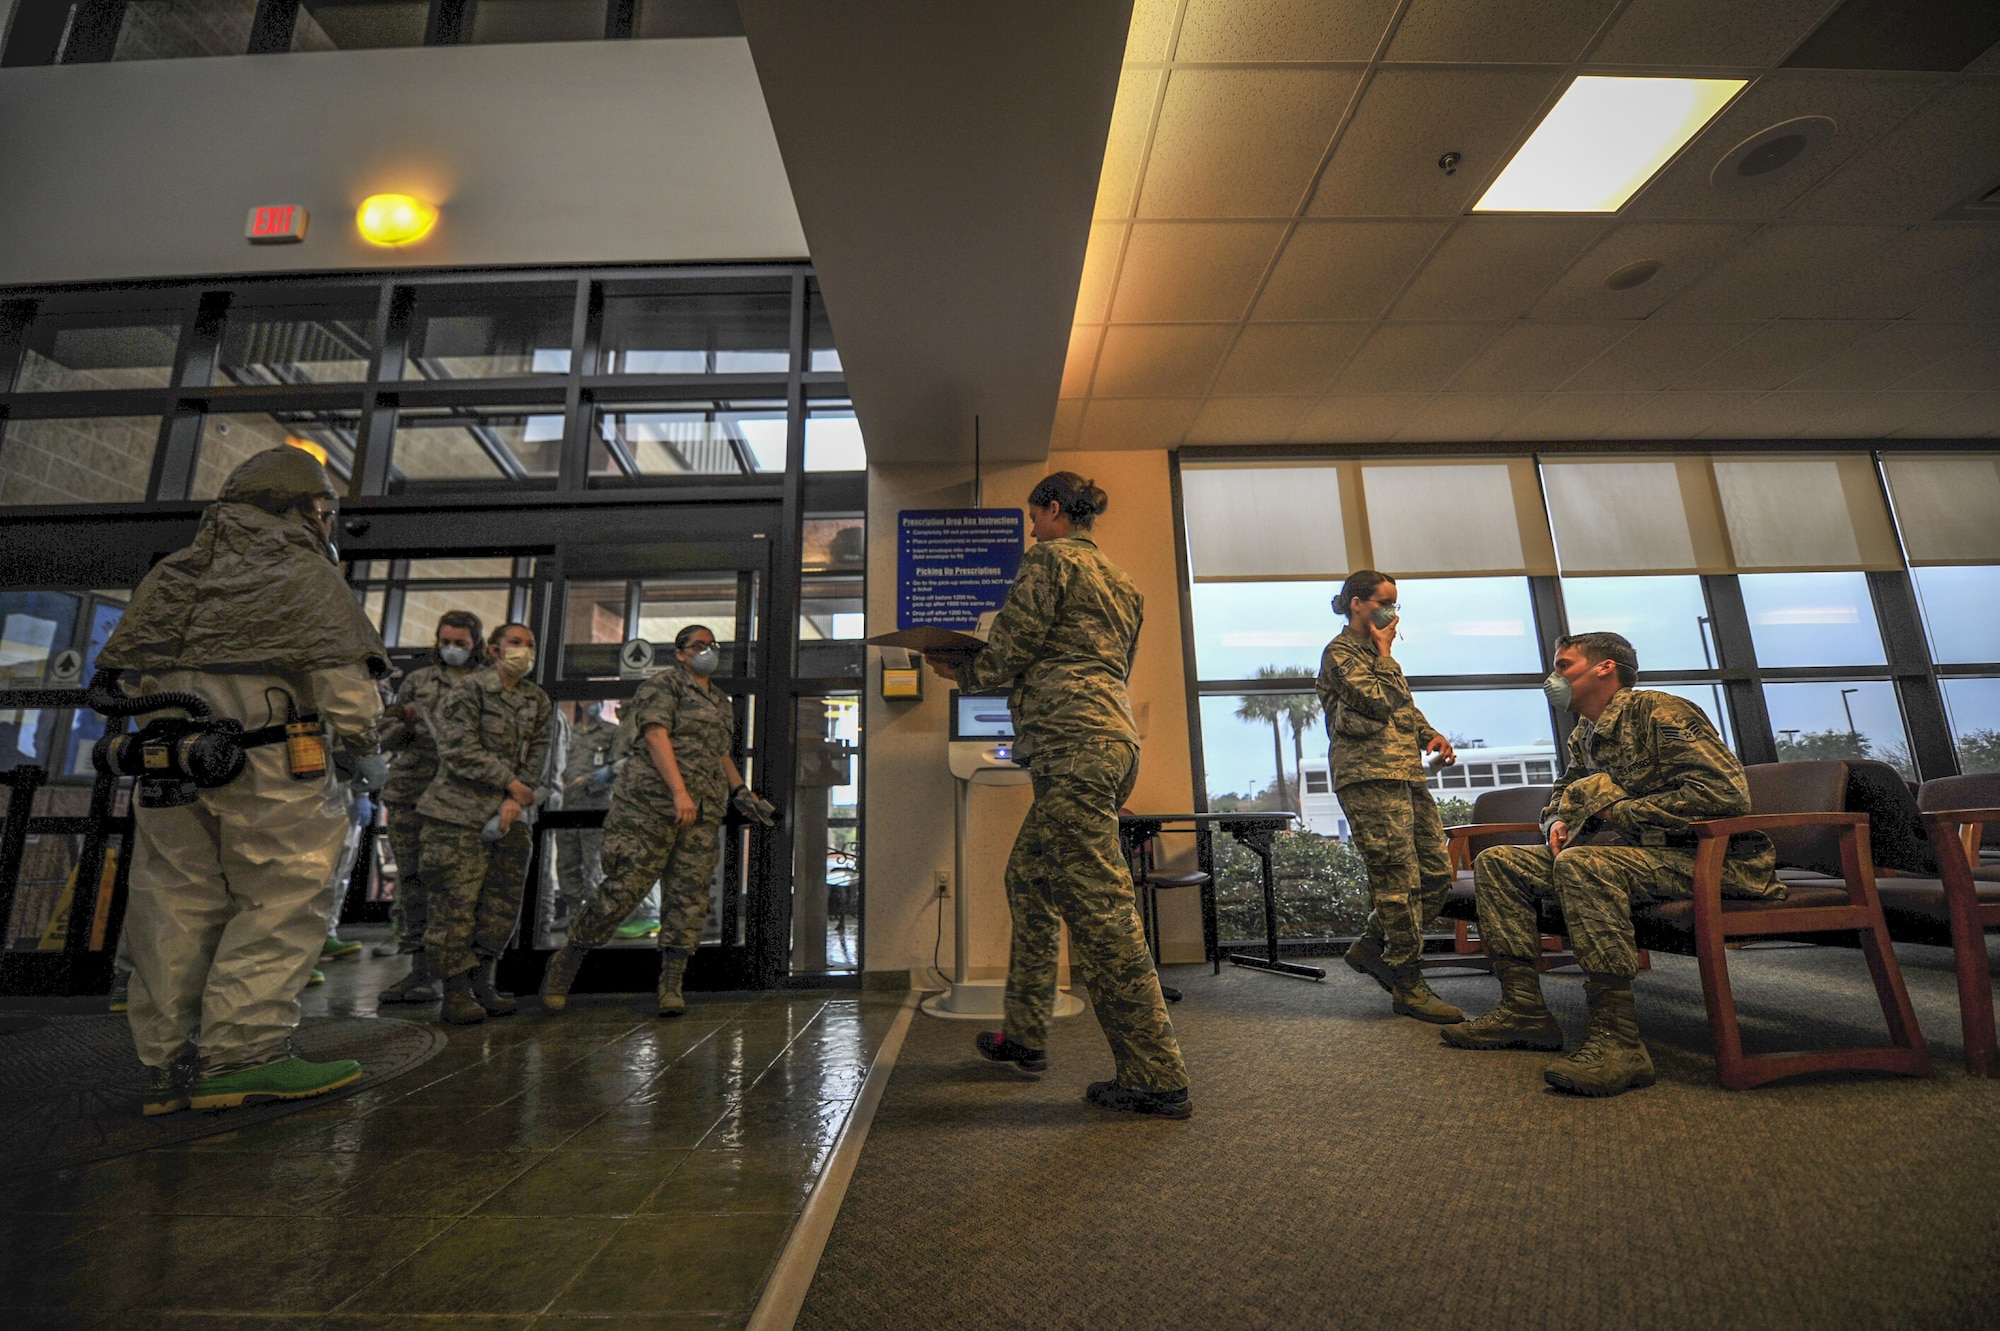 Airmen from the 1st Special Operations Medical Group participated in a disease containment exercise at Hurlburt Field, Fla., Feb. 4, 2015. The purpose of the exercise was to ensure all medical personnel are properly trained to react to a disease outbreak on base, as well as in the community. (U.S. Air Force photo/Senior Airman Christopher Callaway)